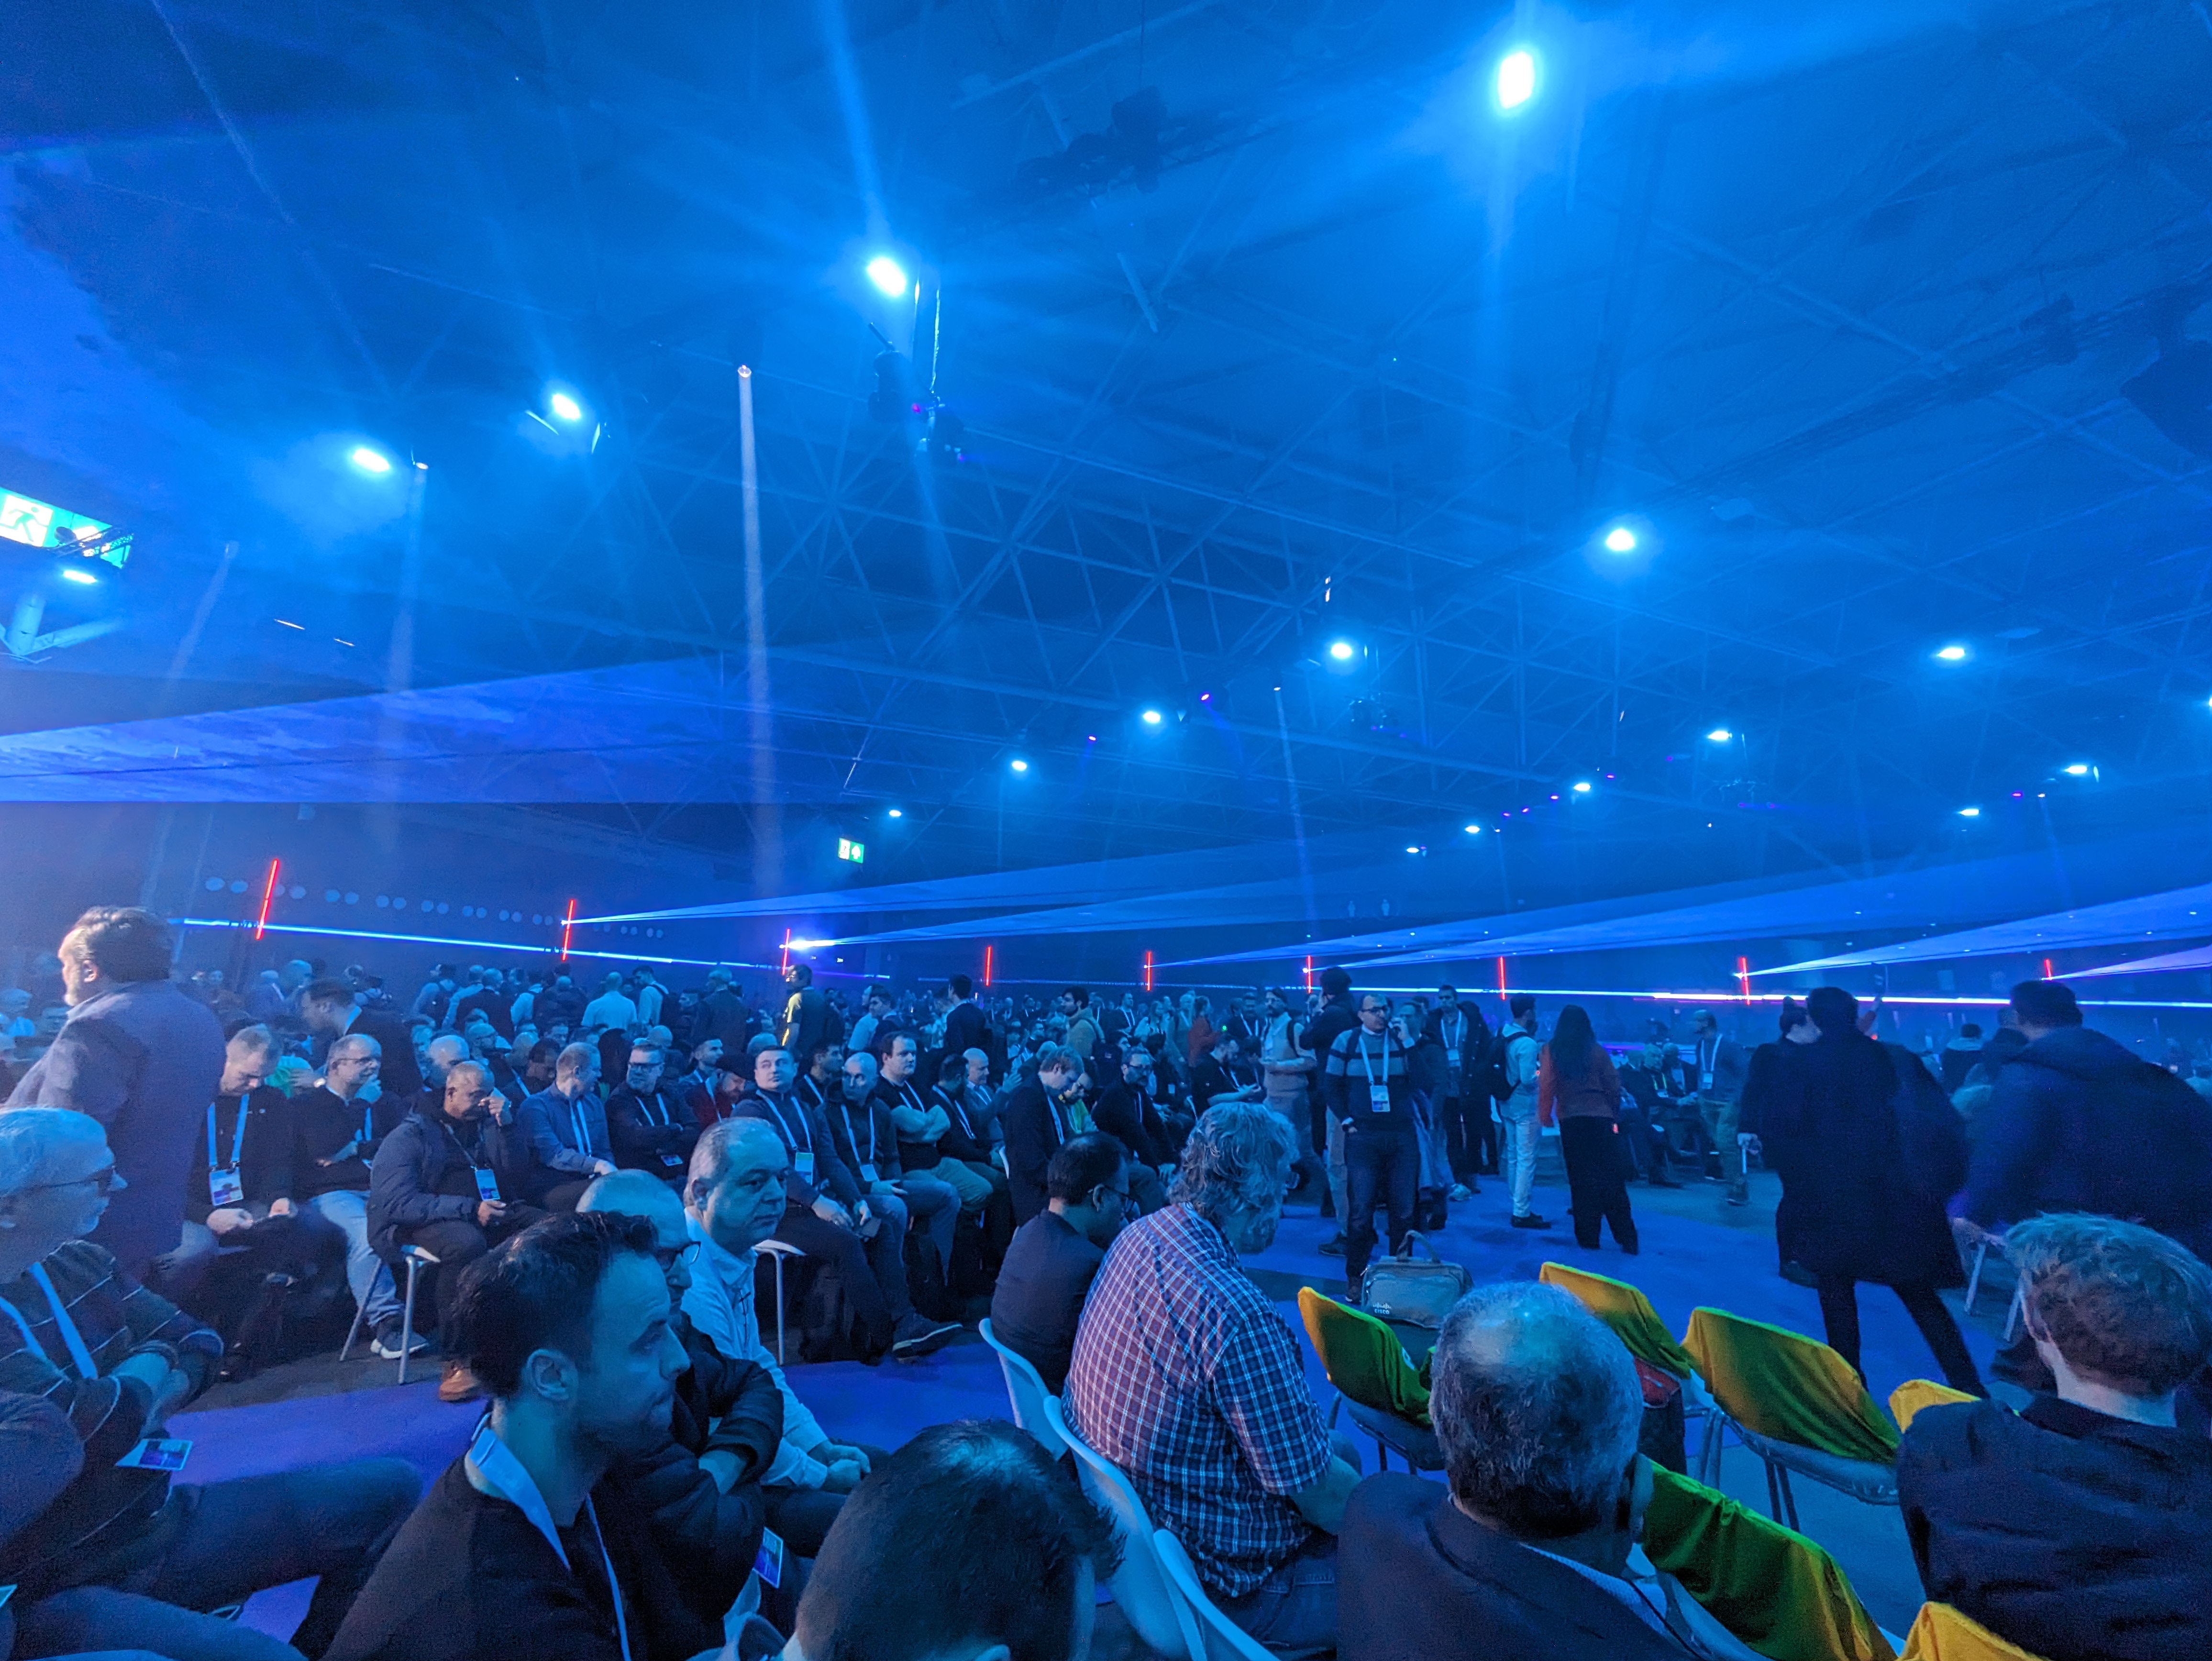 Keynote arena filling up with people